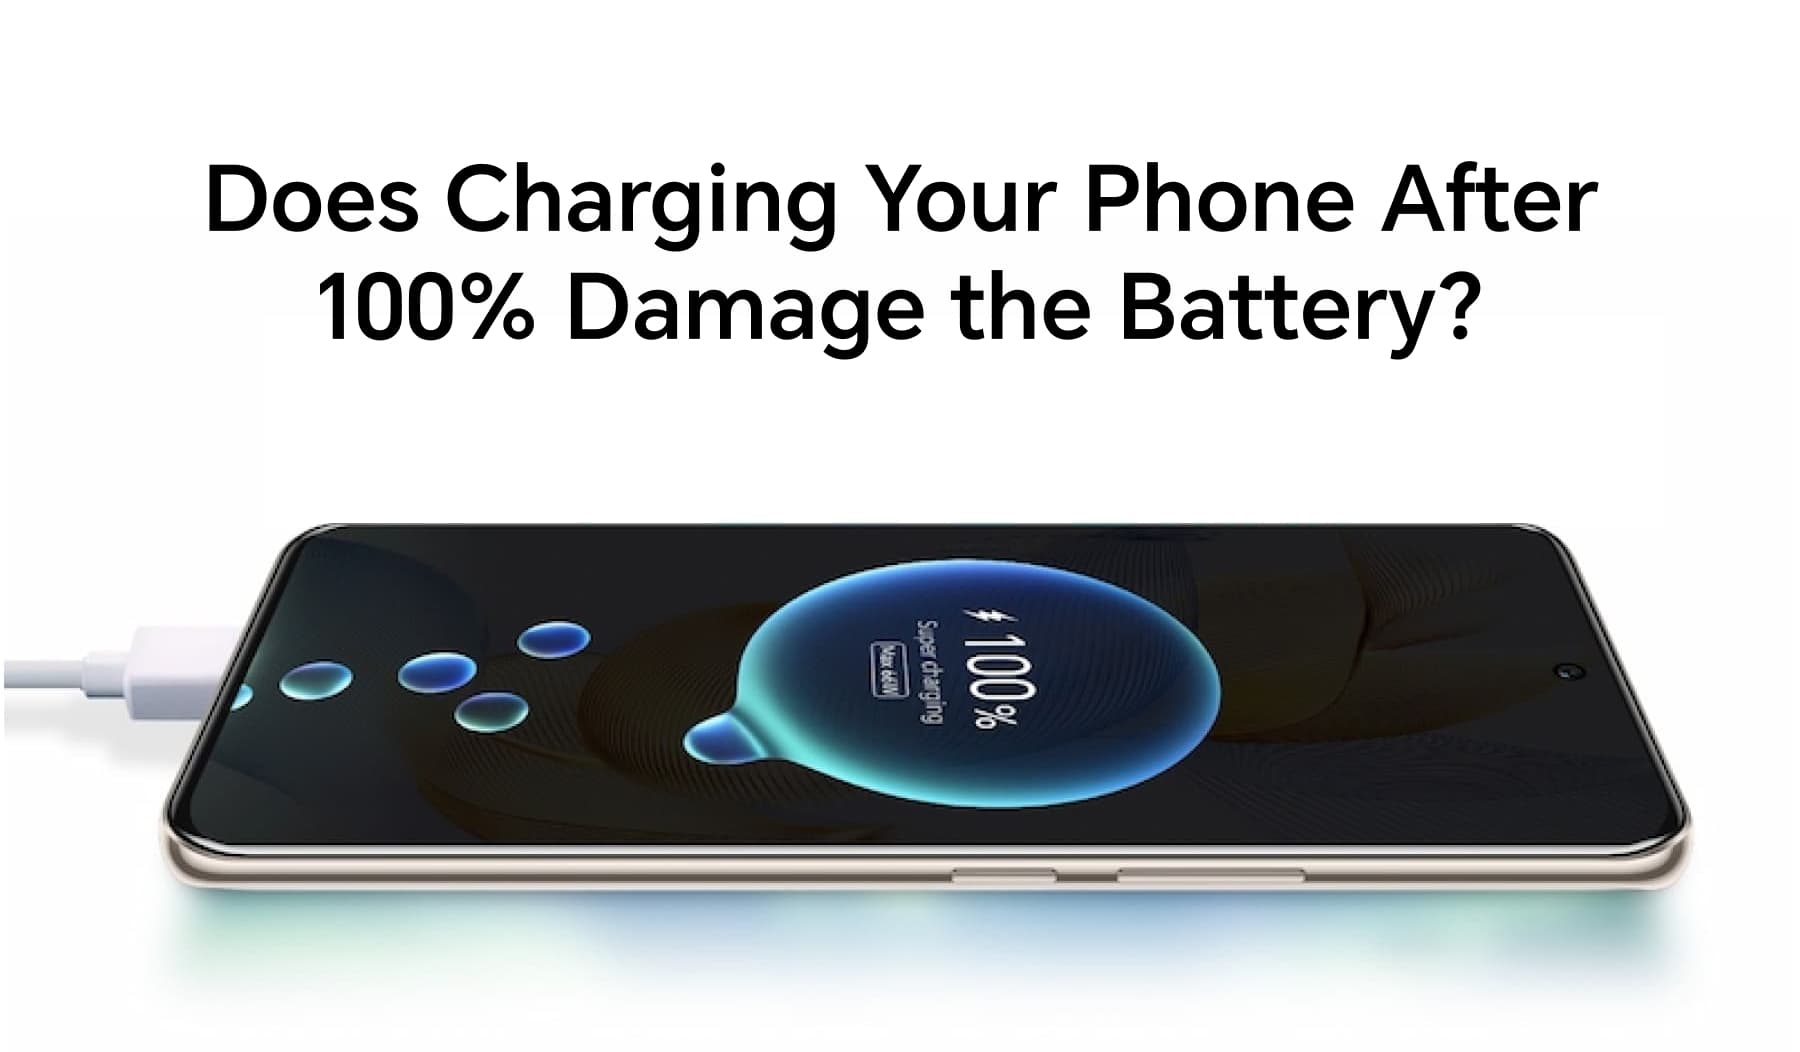 Does Charging Your Phone After 100% Damage the Battery